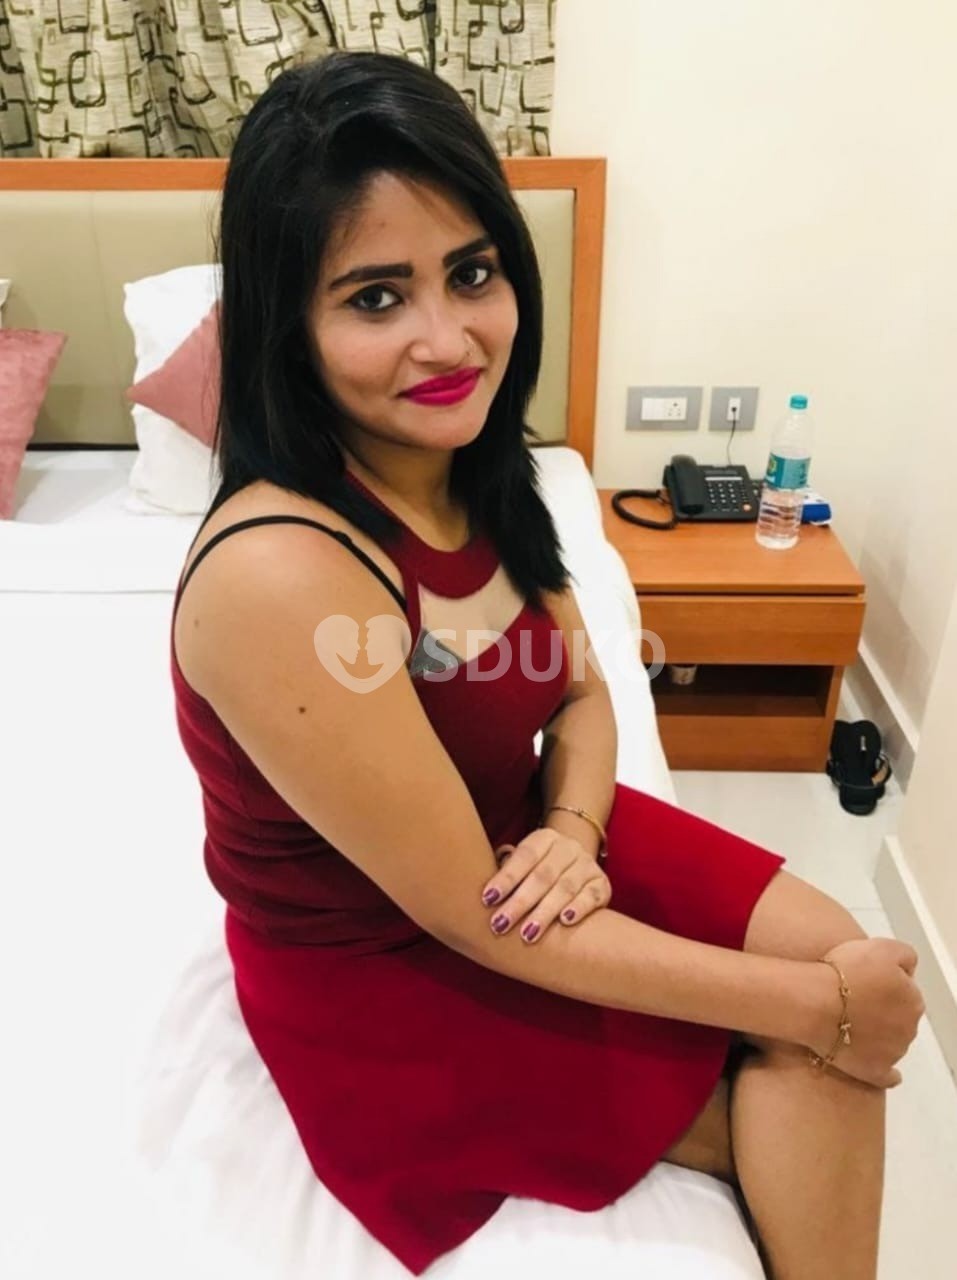 Ranchi Myself Payal call girl service hotel and home service 24 hours available now call me genuine service providers